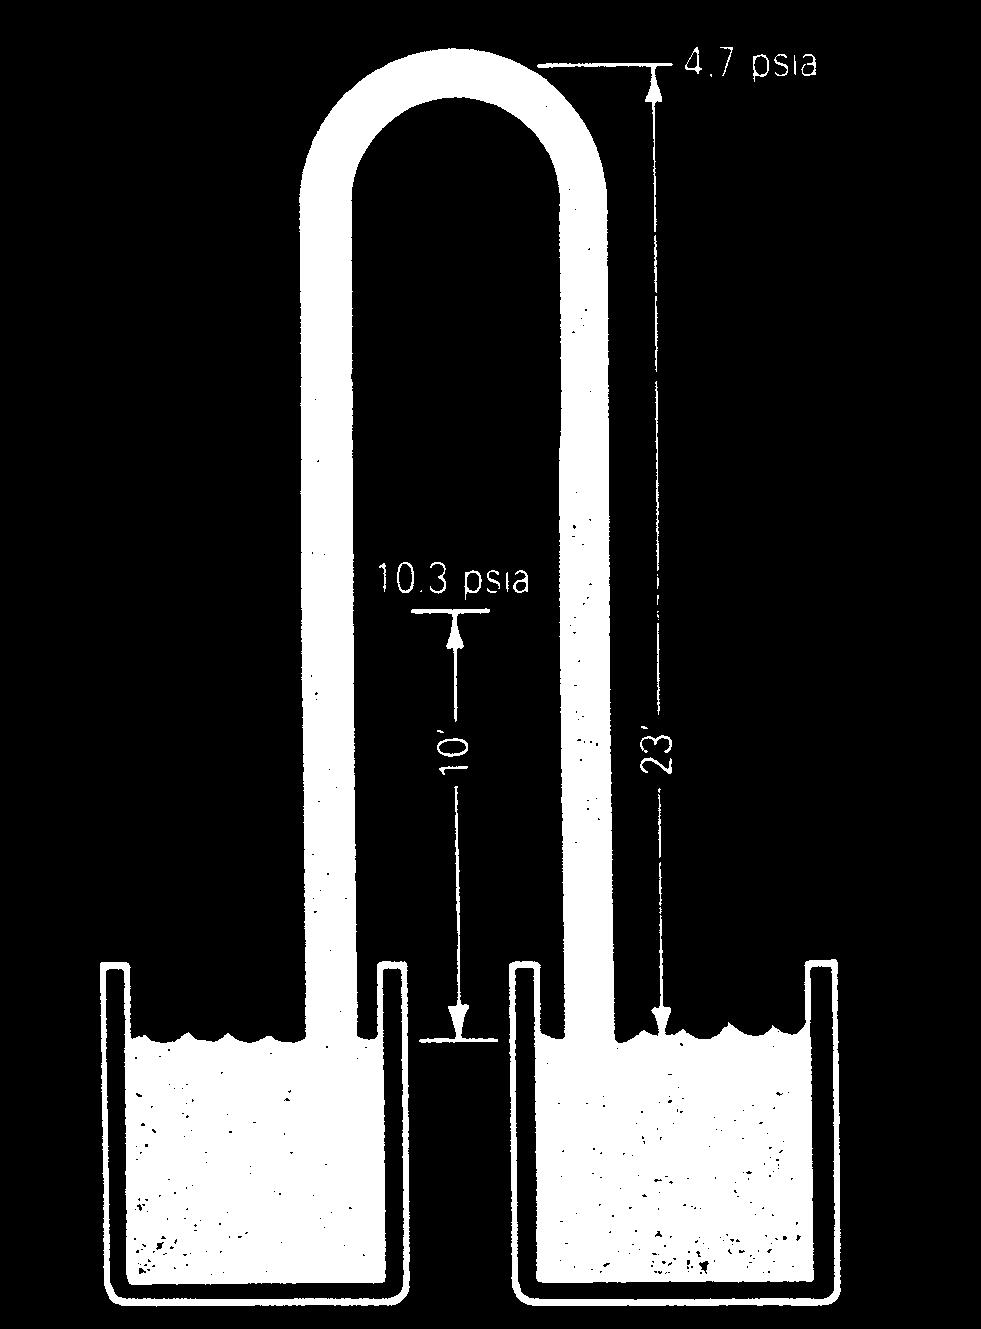 Figure 9-2 Pipe Network With Four Endpoints Figure 9-1 Hydrostatics Showing Reduced Absolute Pressure in a Siphon Figure 9-3 Five Typical Plumbing Details Without Cross- Connection Control represent